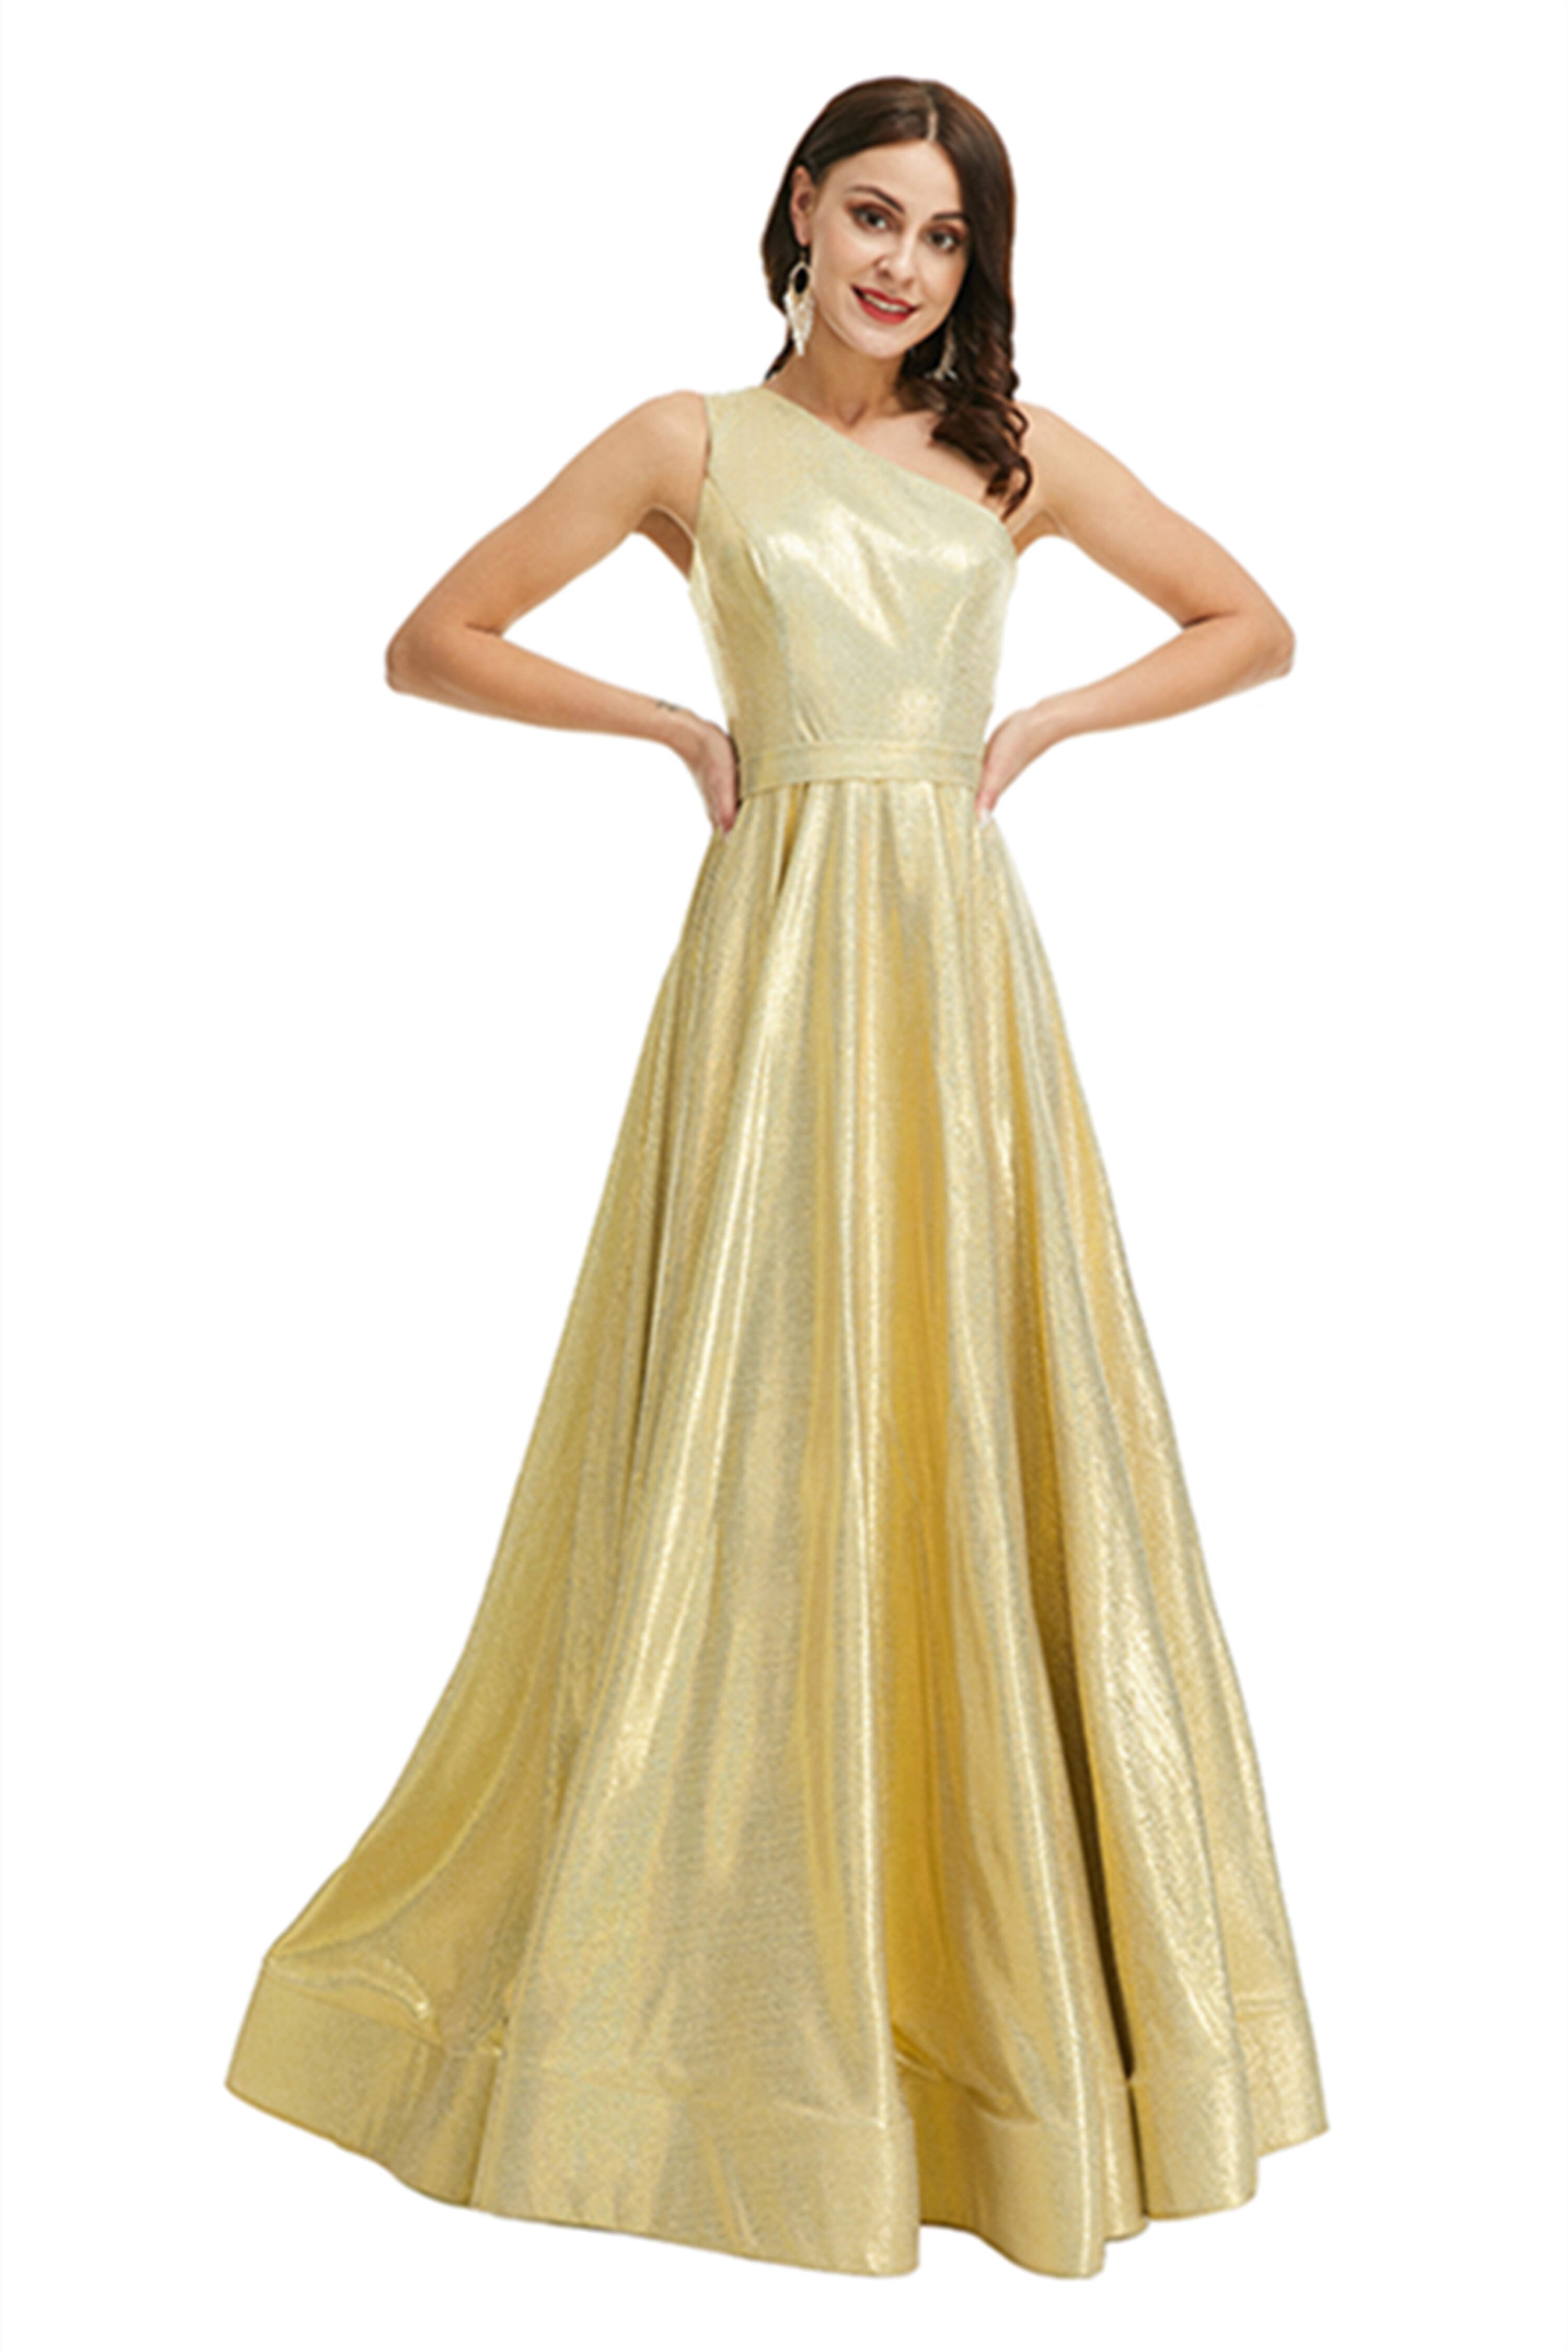 Gold Satin One Shoulder With Split Corset Prom Dresses outfit, Homecomming Dresses Lace